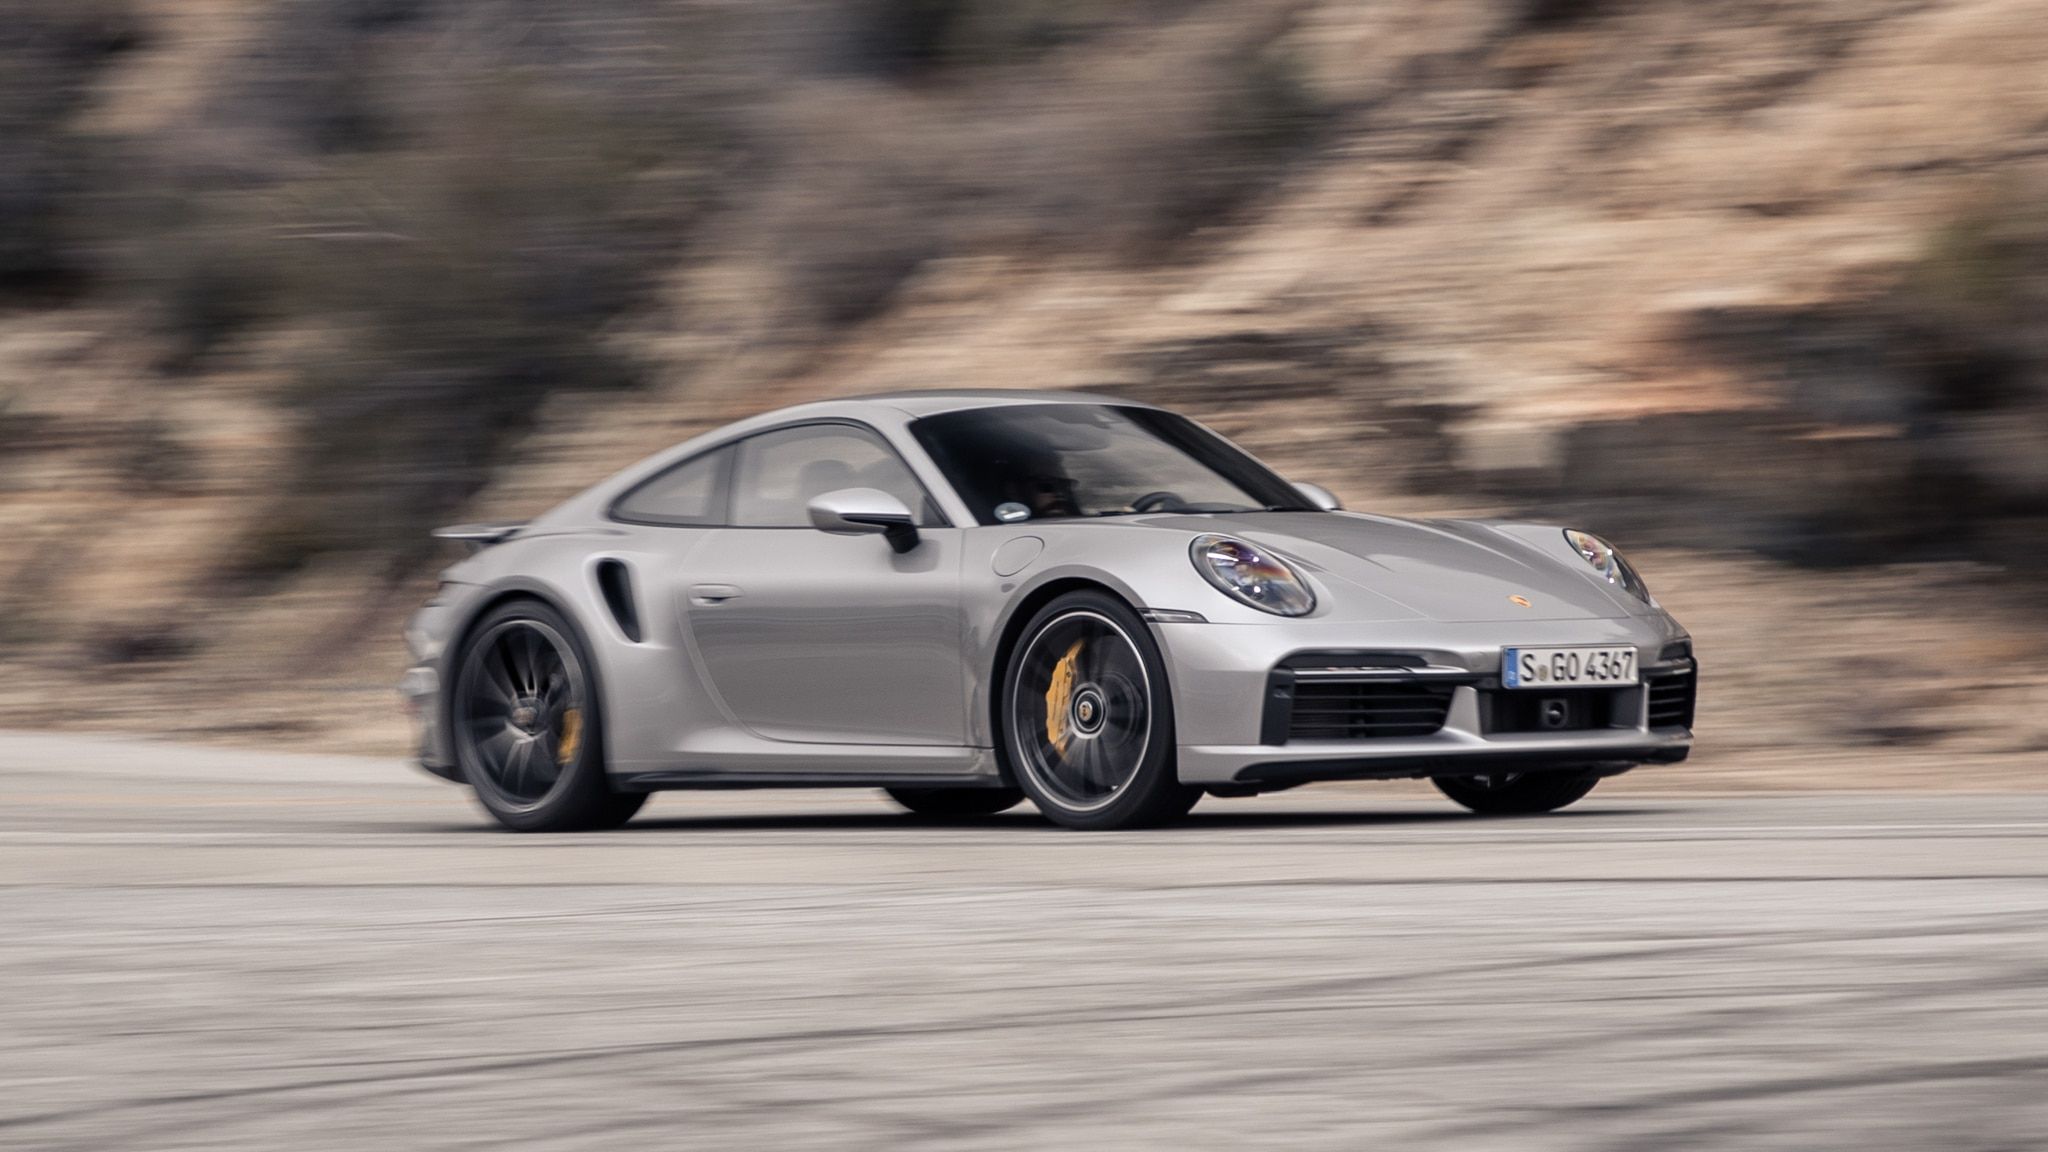 Porsche 911 Turbo S First Drive Review: How Is This Even Possible?